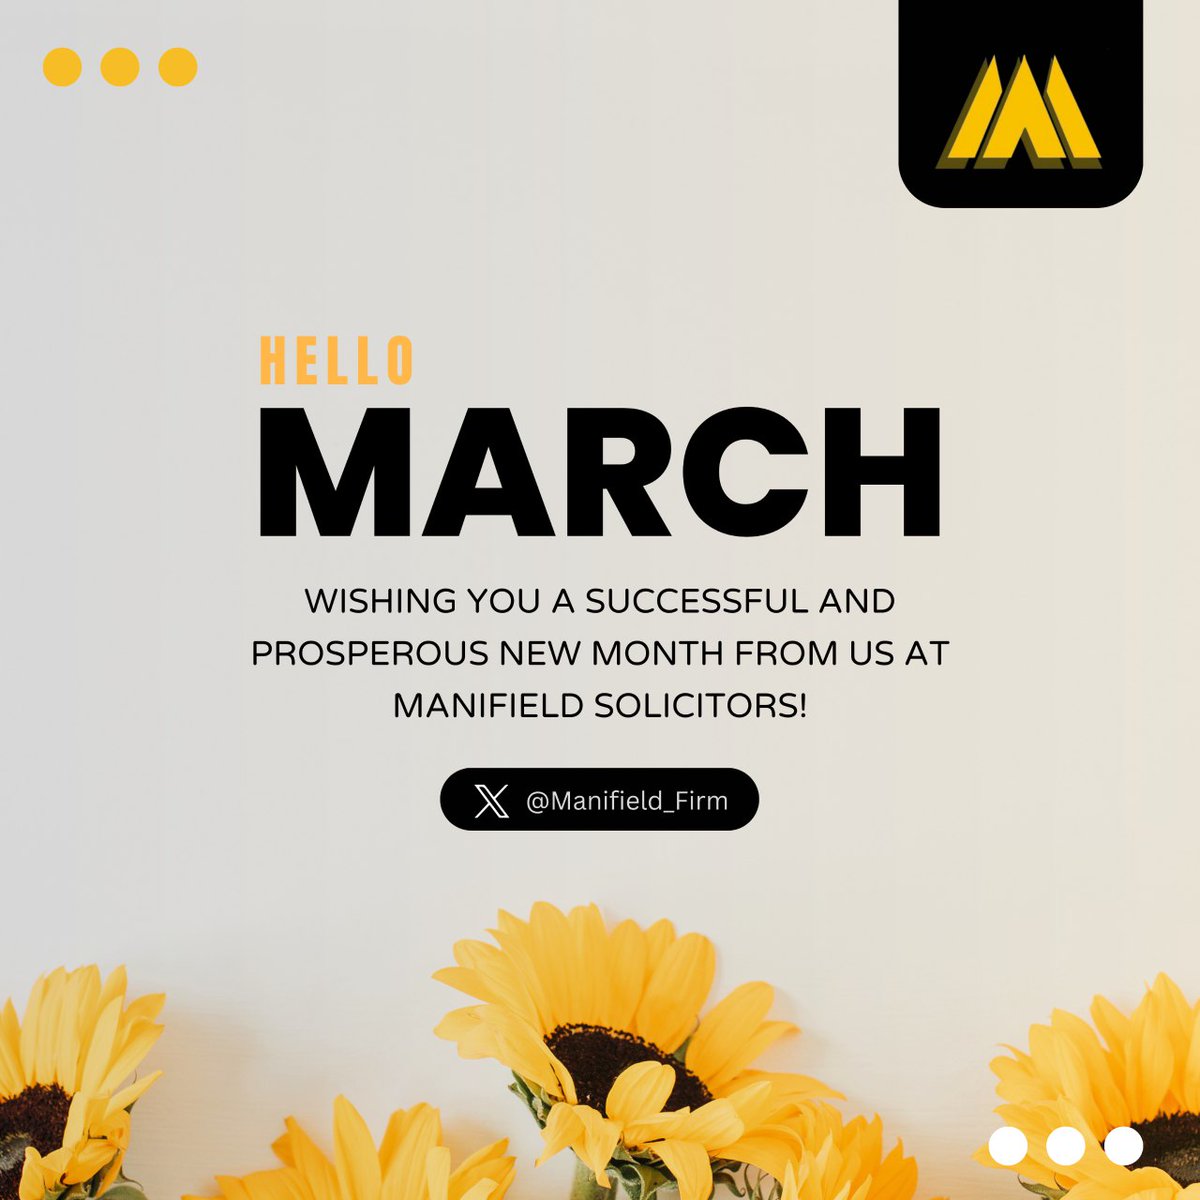 Happy New Month from Manifield Solicitors! 🎉 Wishing everyone a month filled with success, prosperity, and legal victories. Let's make March one to remember!

#ManifieldSolicitors #NewMonth #Success #Prosperity #LegalServices #LawFirm #March #Lawyers #LegalExperts #LegalAdvice